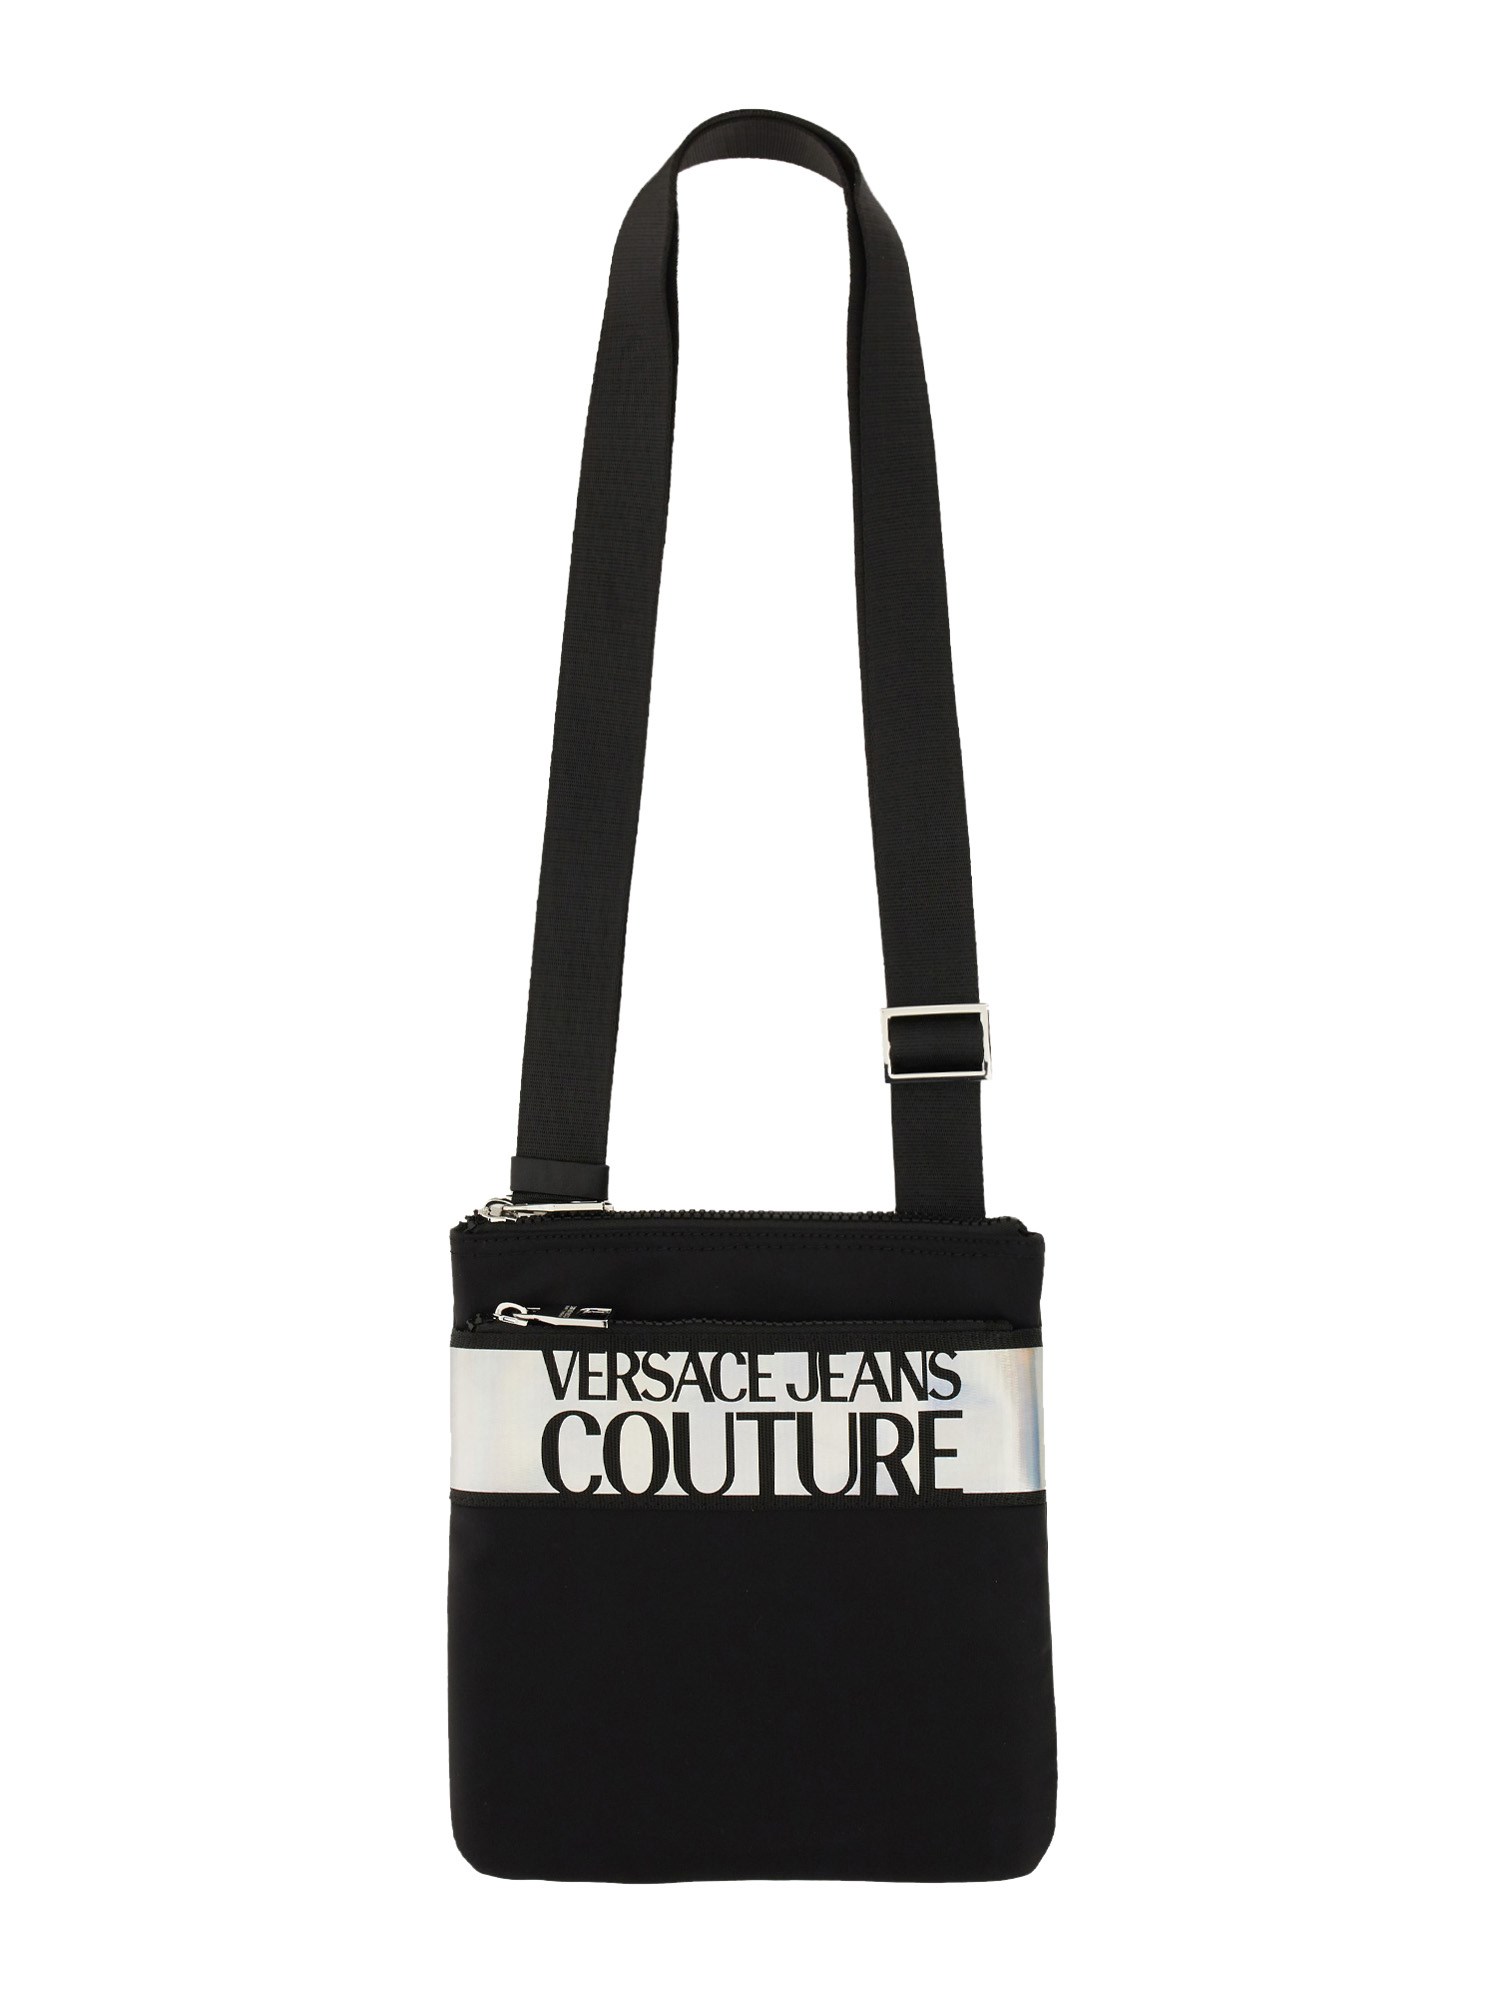 versace jeans couture bag with logo